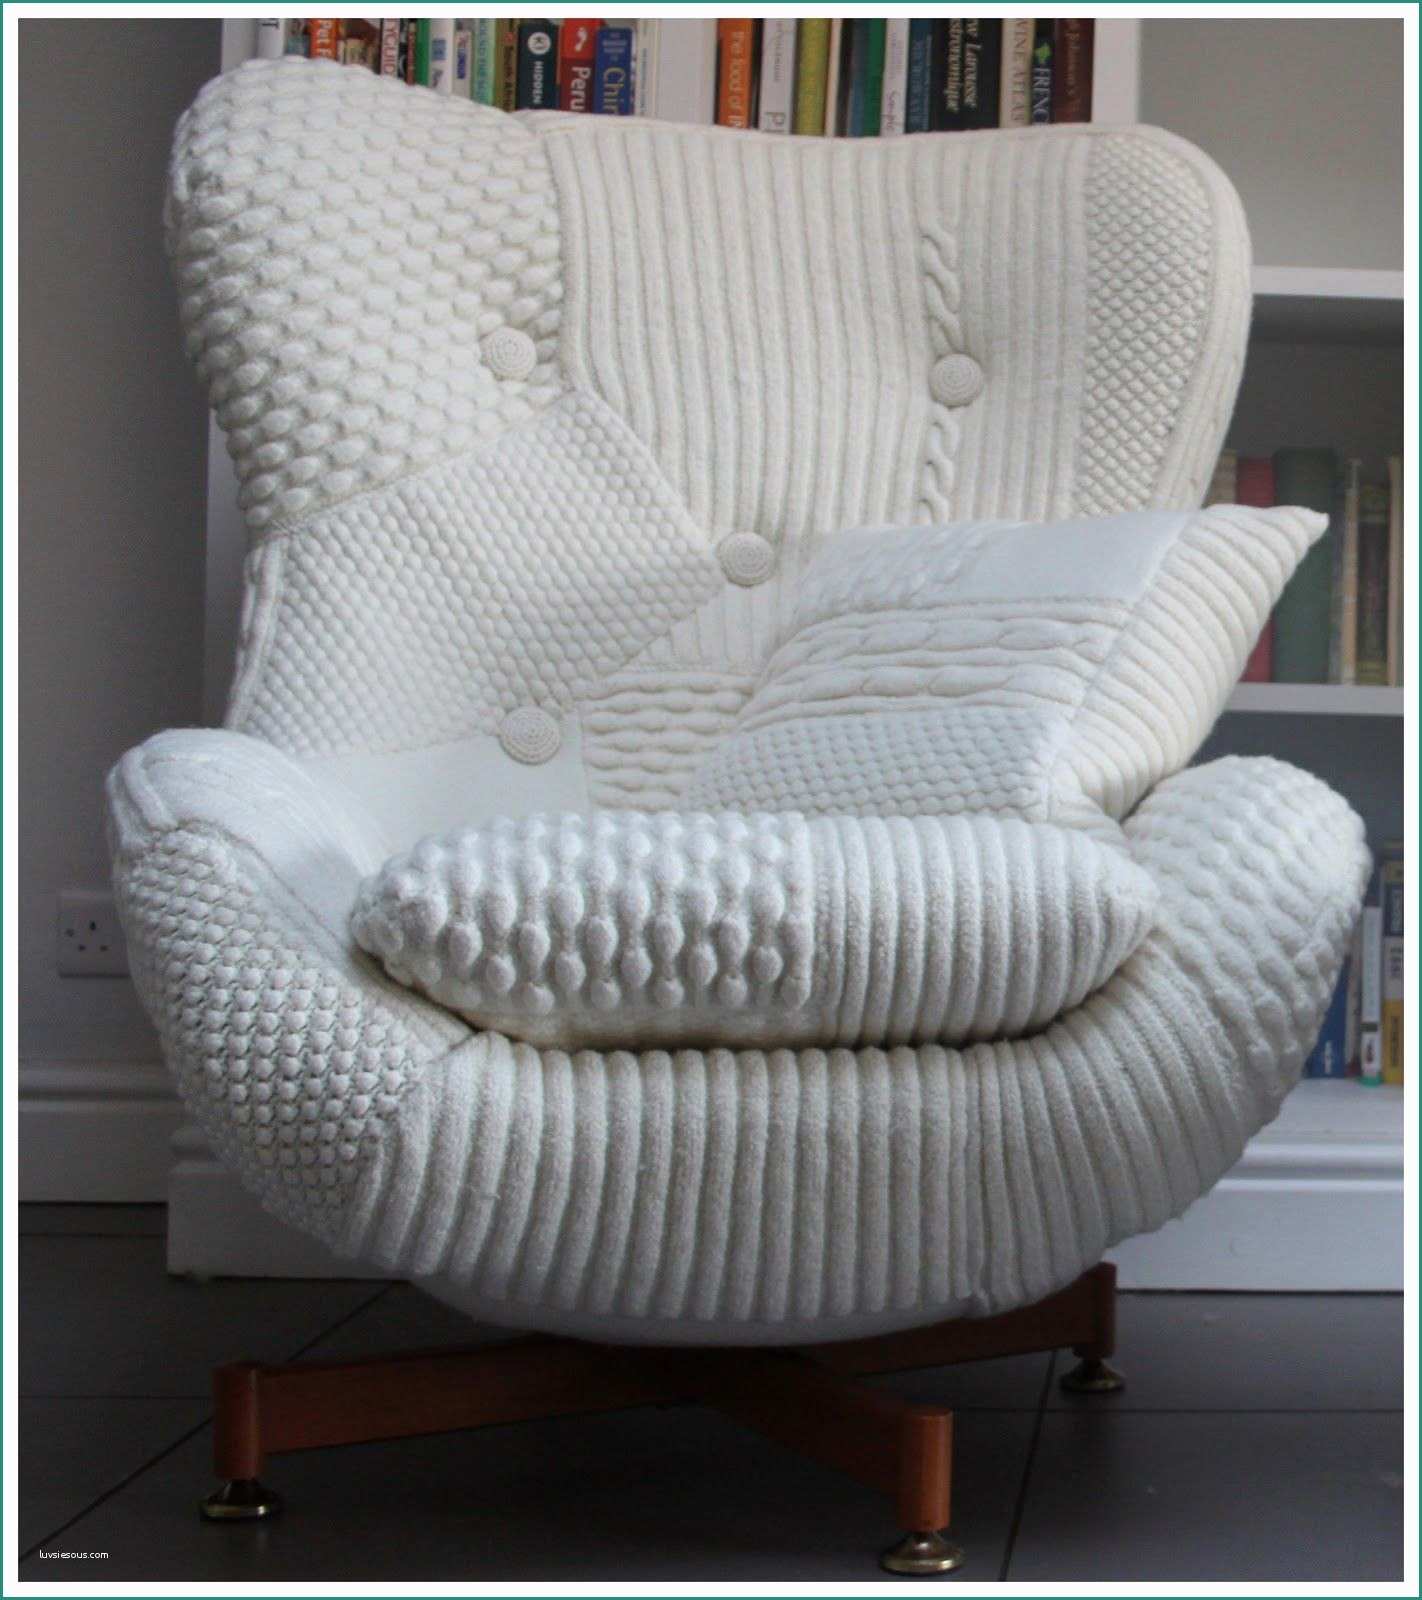 Poltrona Bergere Moderna E This Chair is Saying " E Cuddle with Me "